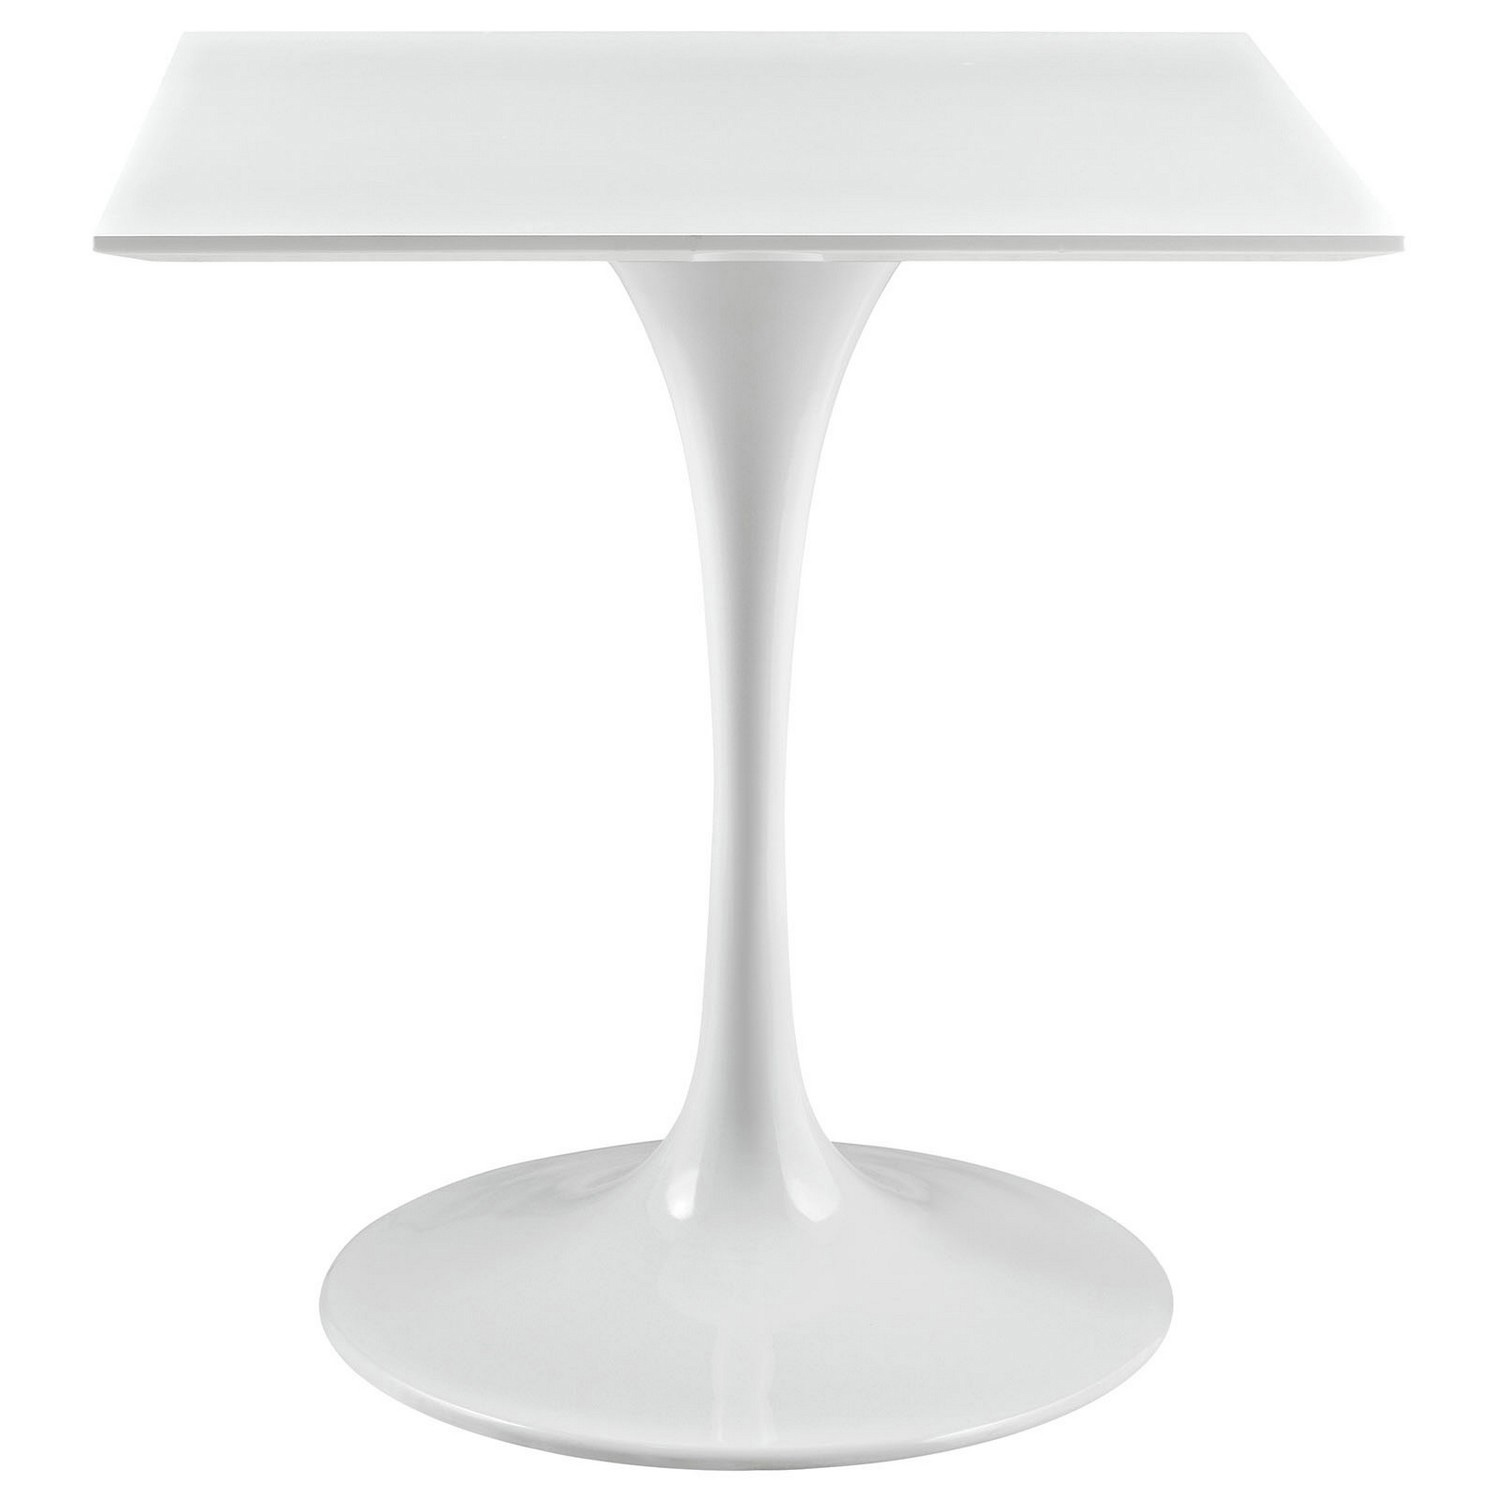 Modway Lippa 28 Square Wood Top Side Table - White